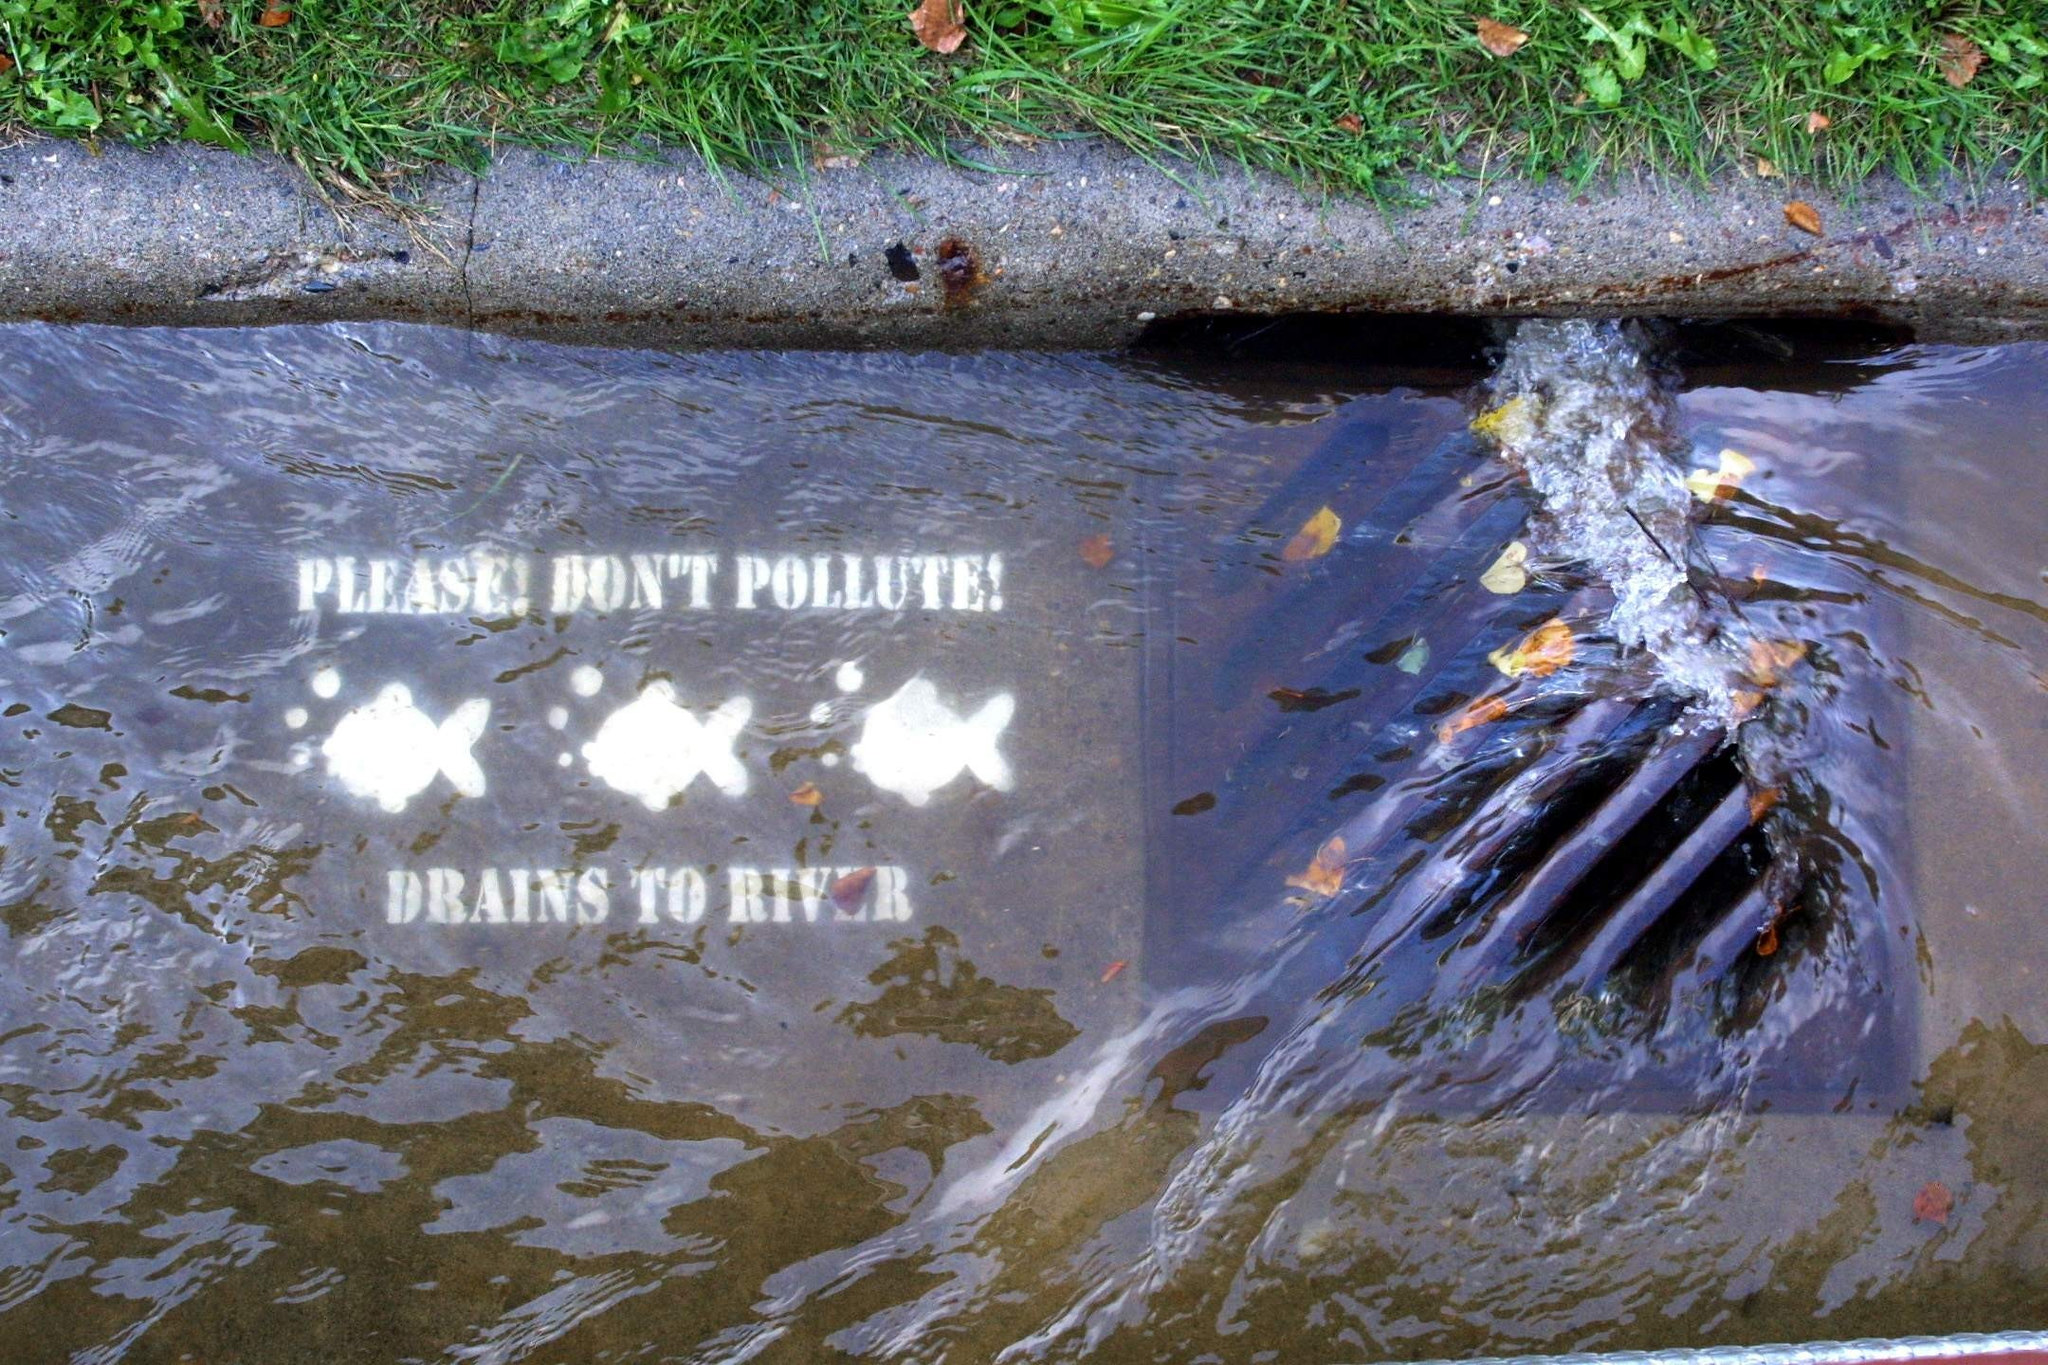 water flowing into street drain over images of fish painted on curb.